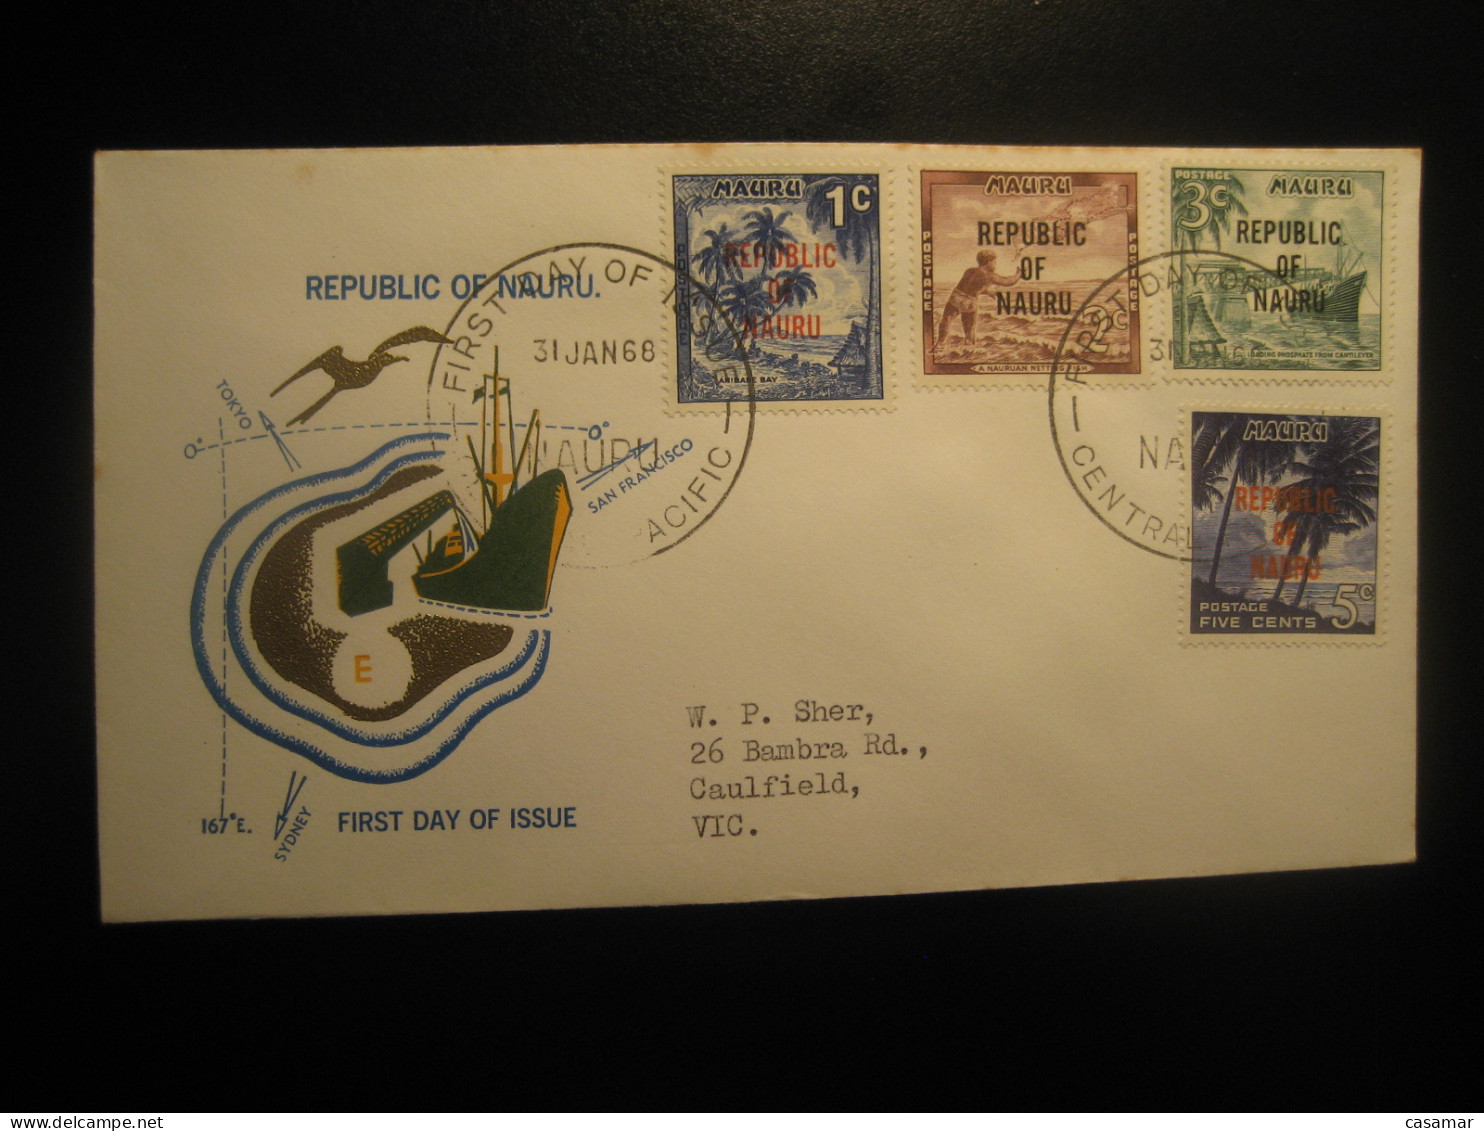 CENTRAL PACIFIC 1968 To Caulfield Australia Phosphate Geology Mineral Minerals FDC Cancel Cover NAURU - Mineralen